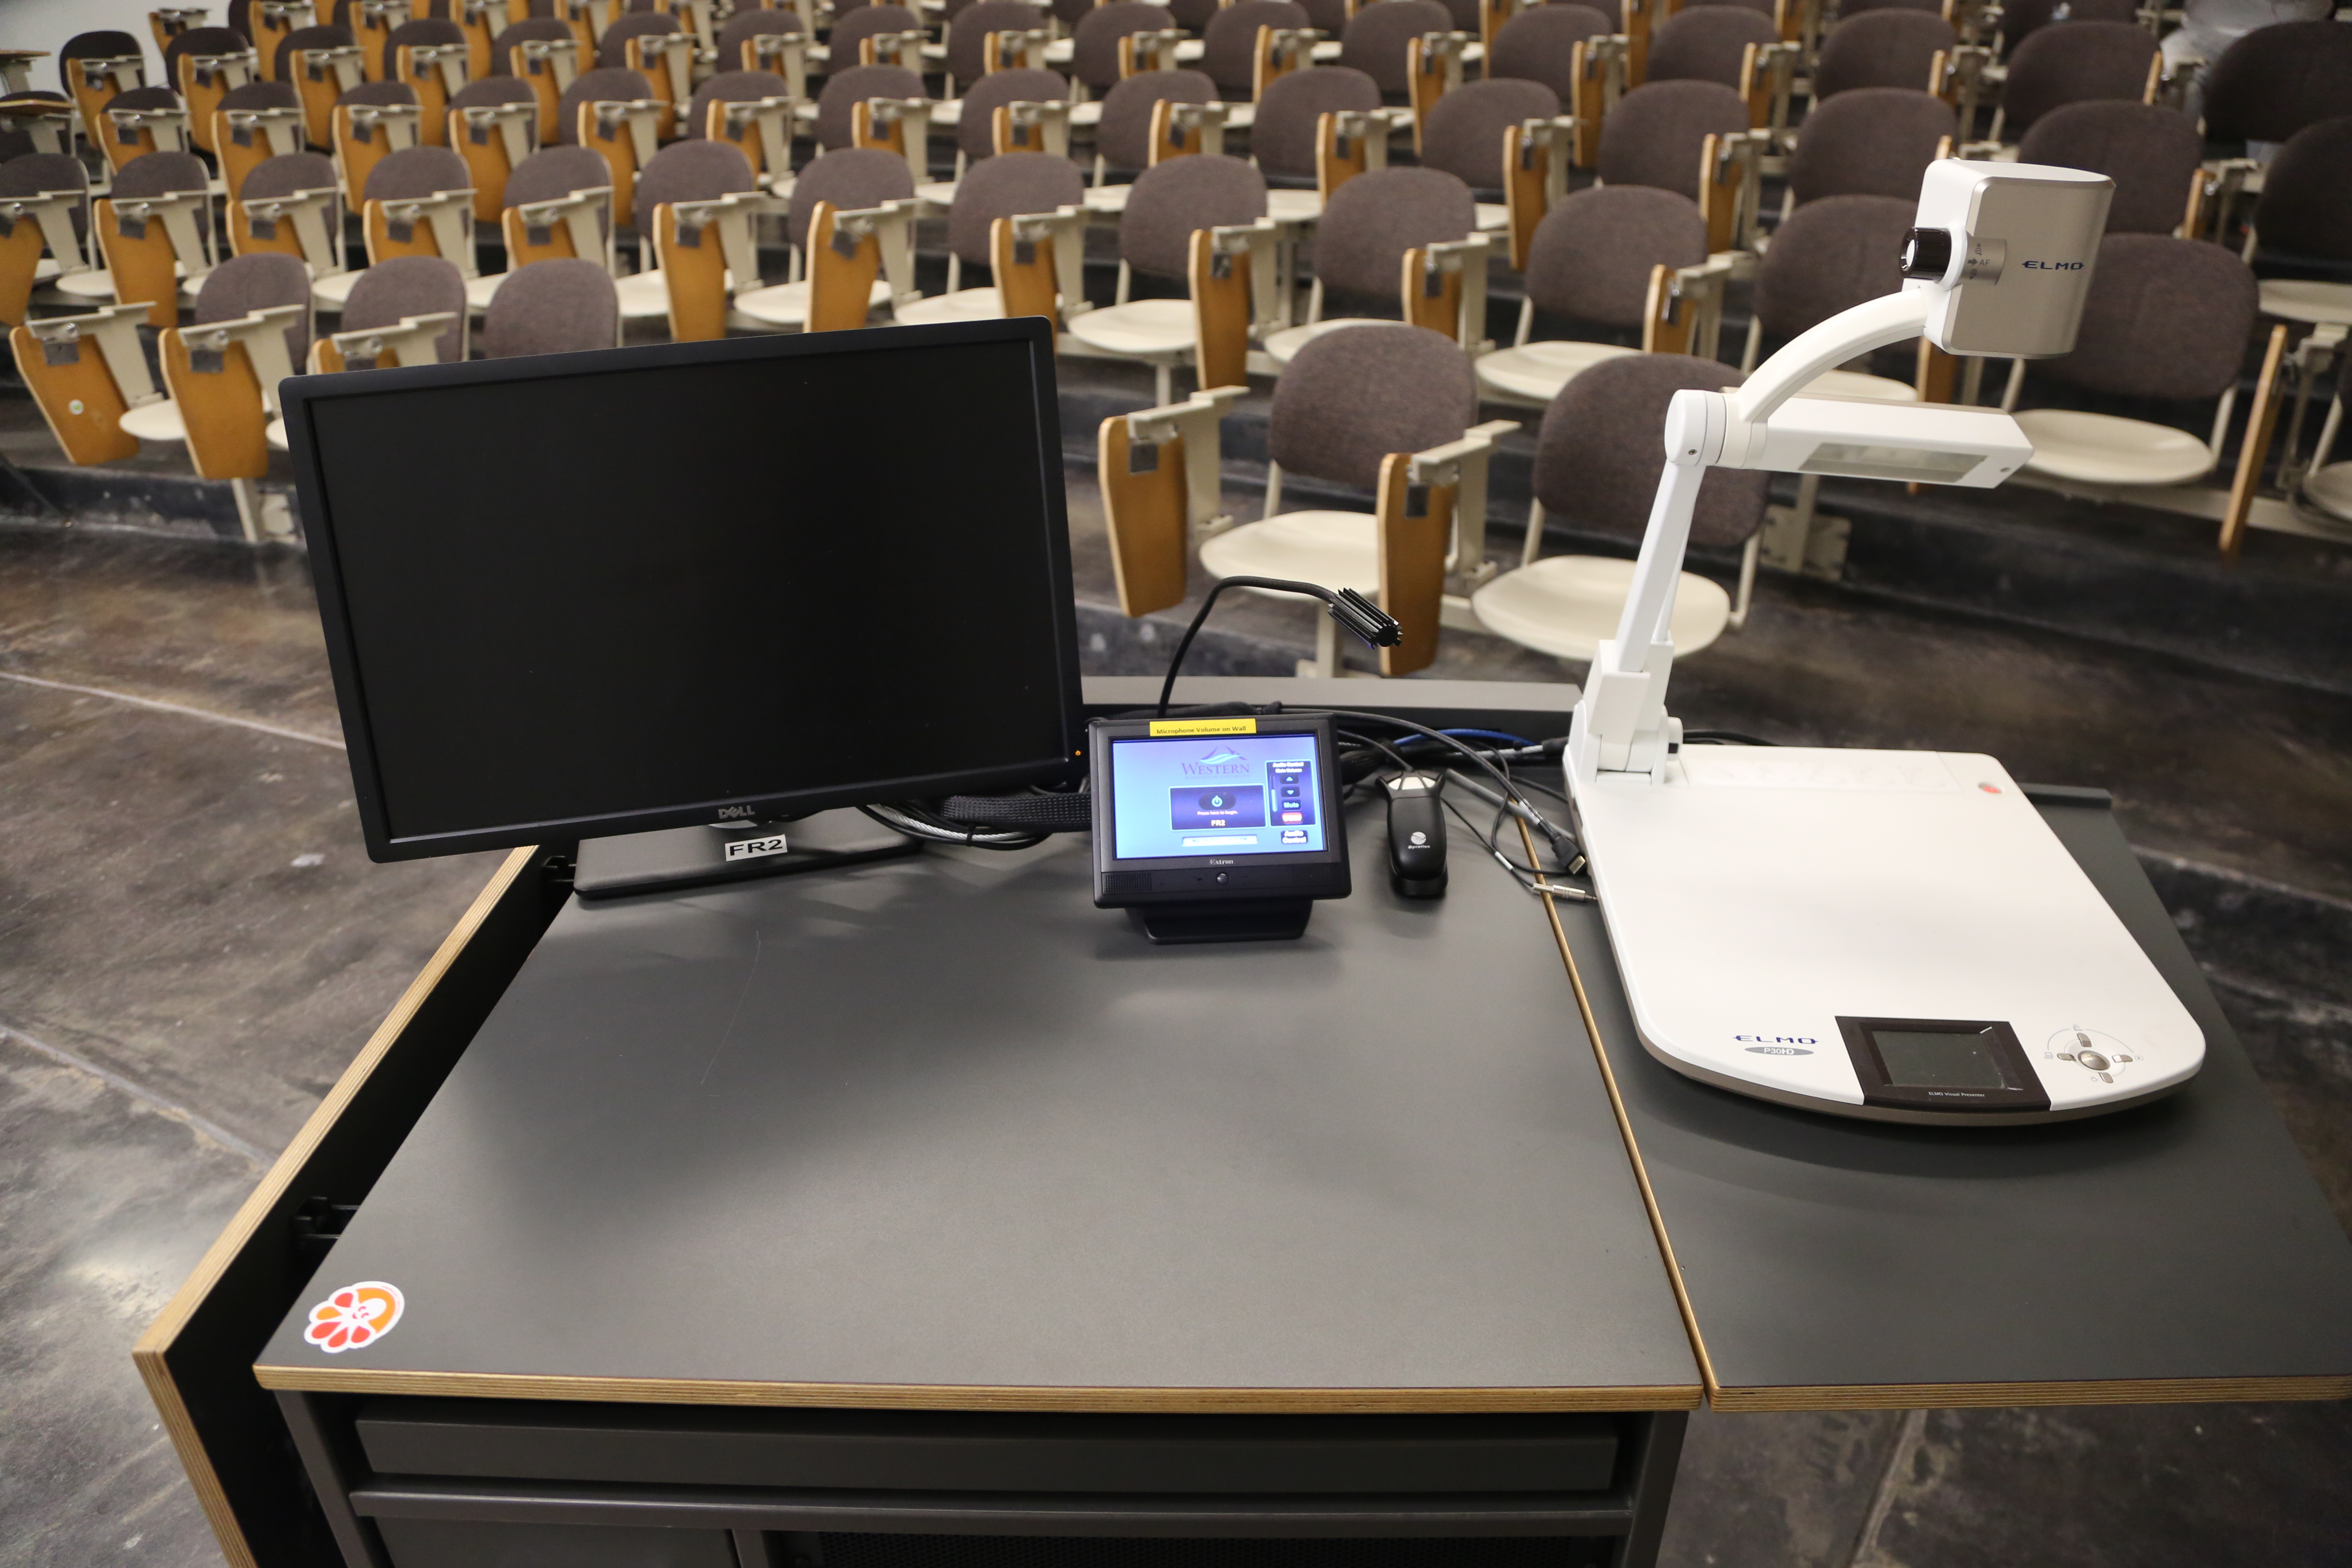 On top of Podium is a Dell Computer Monitor, AV touch screen controller, and Elmo Document Camera.